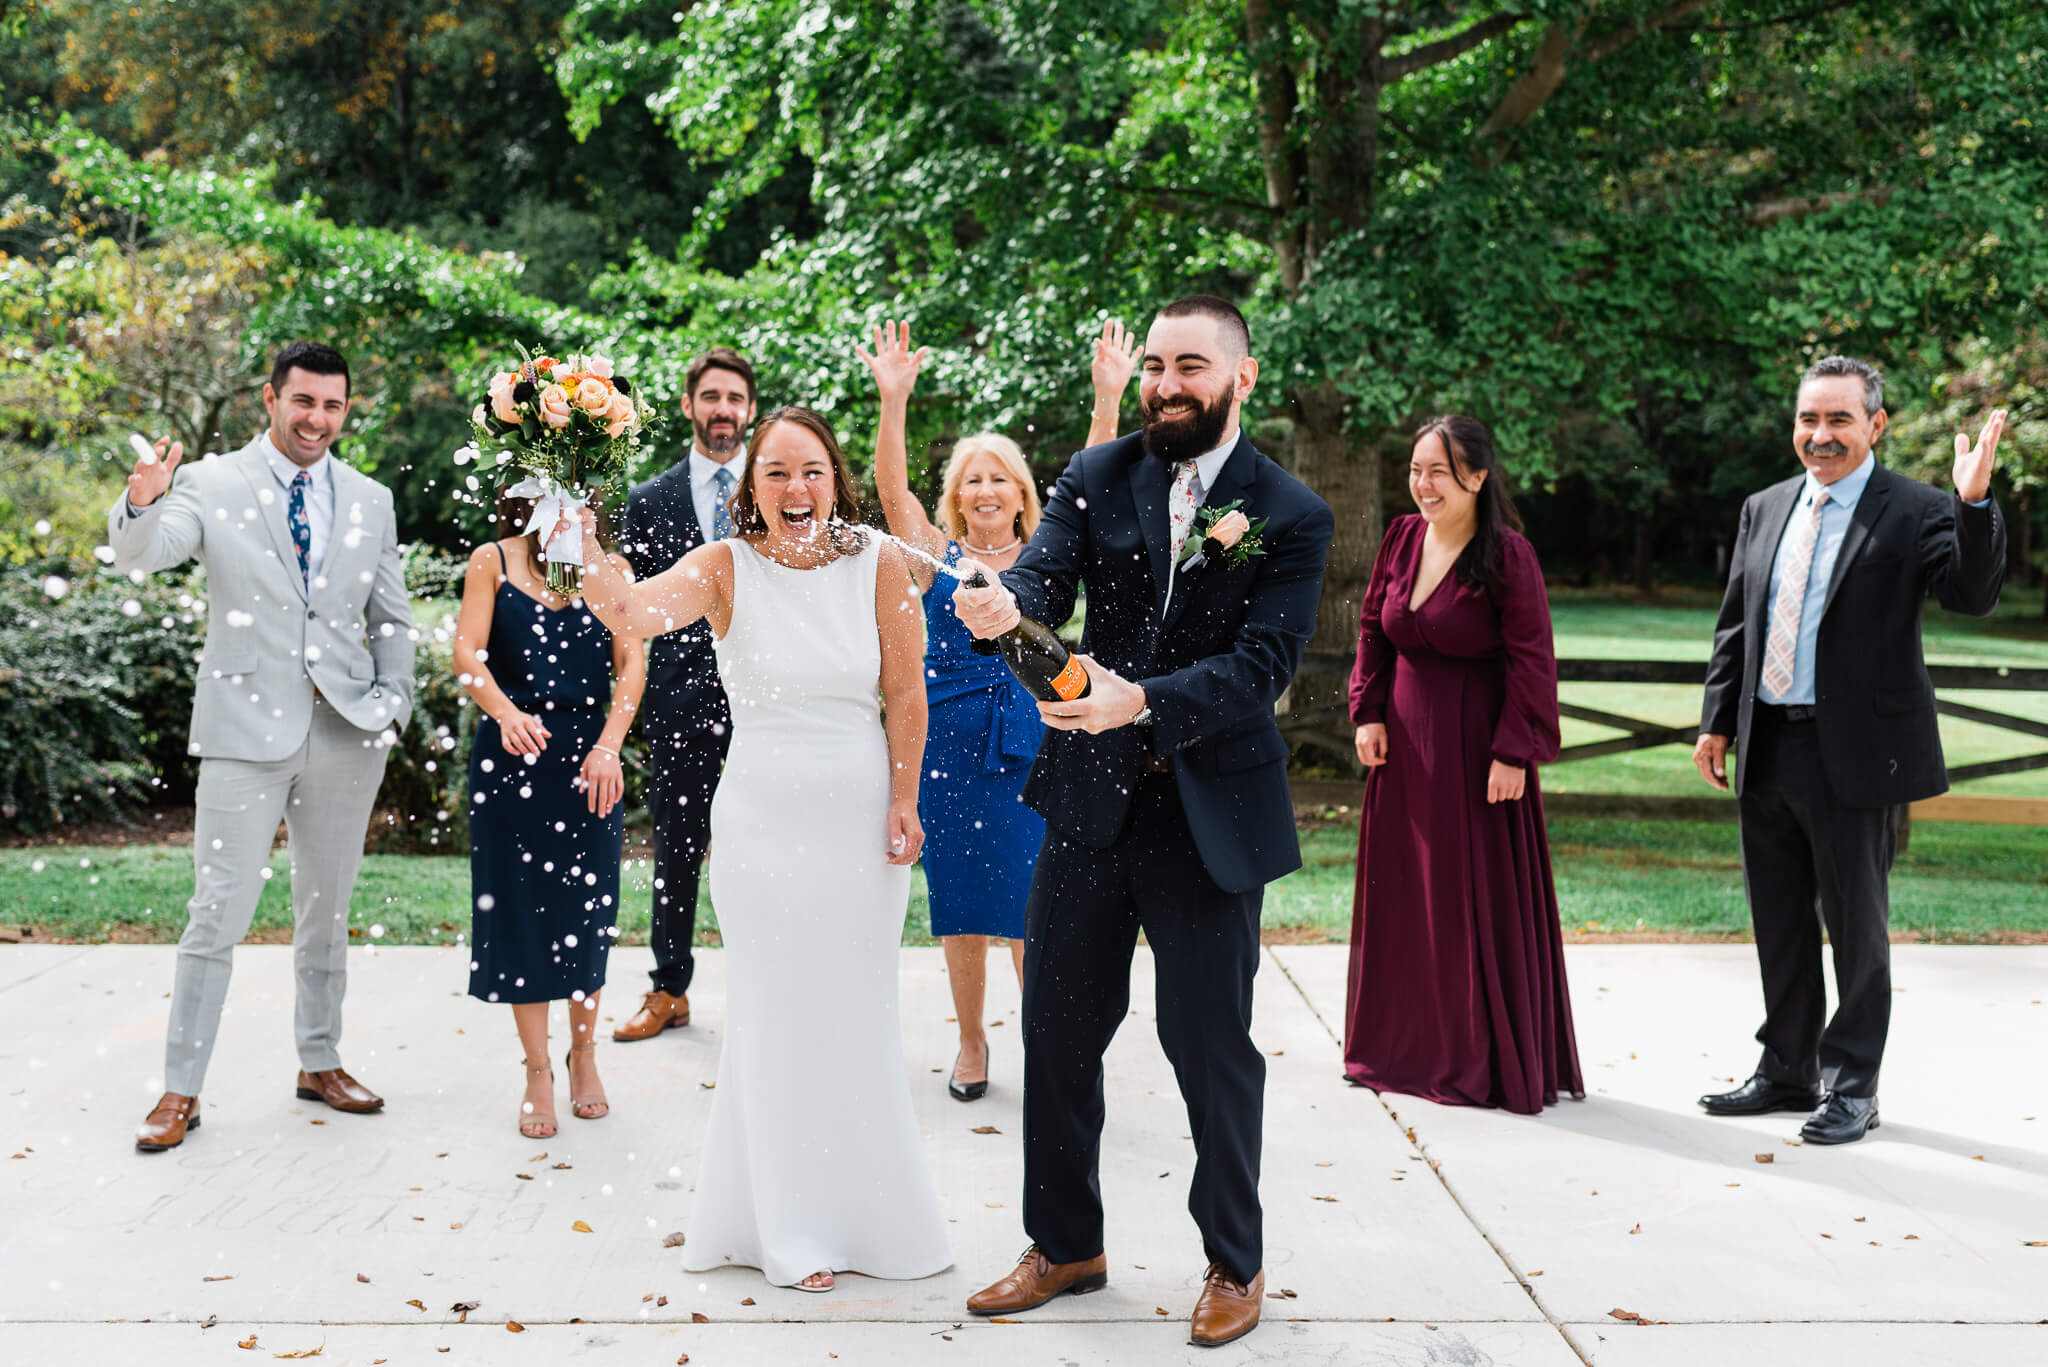 Newlyweds pop Champagne while standing in a patio at meadowlark botanical gardens with their wedding party cheering behind them